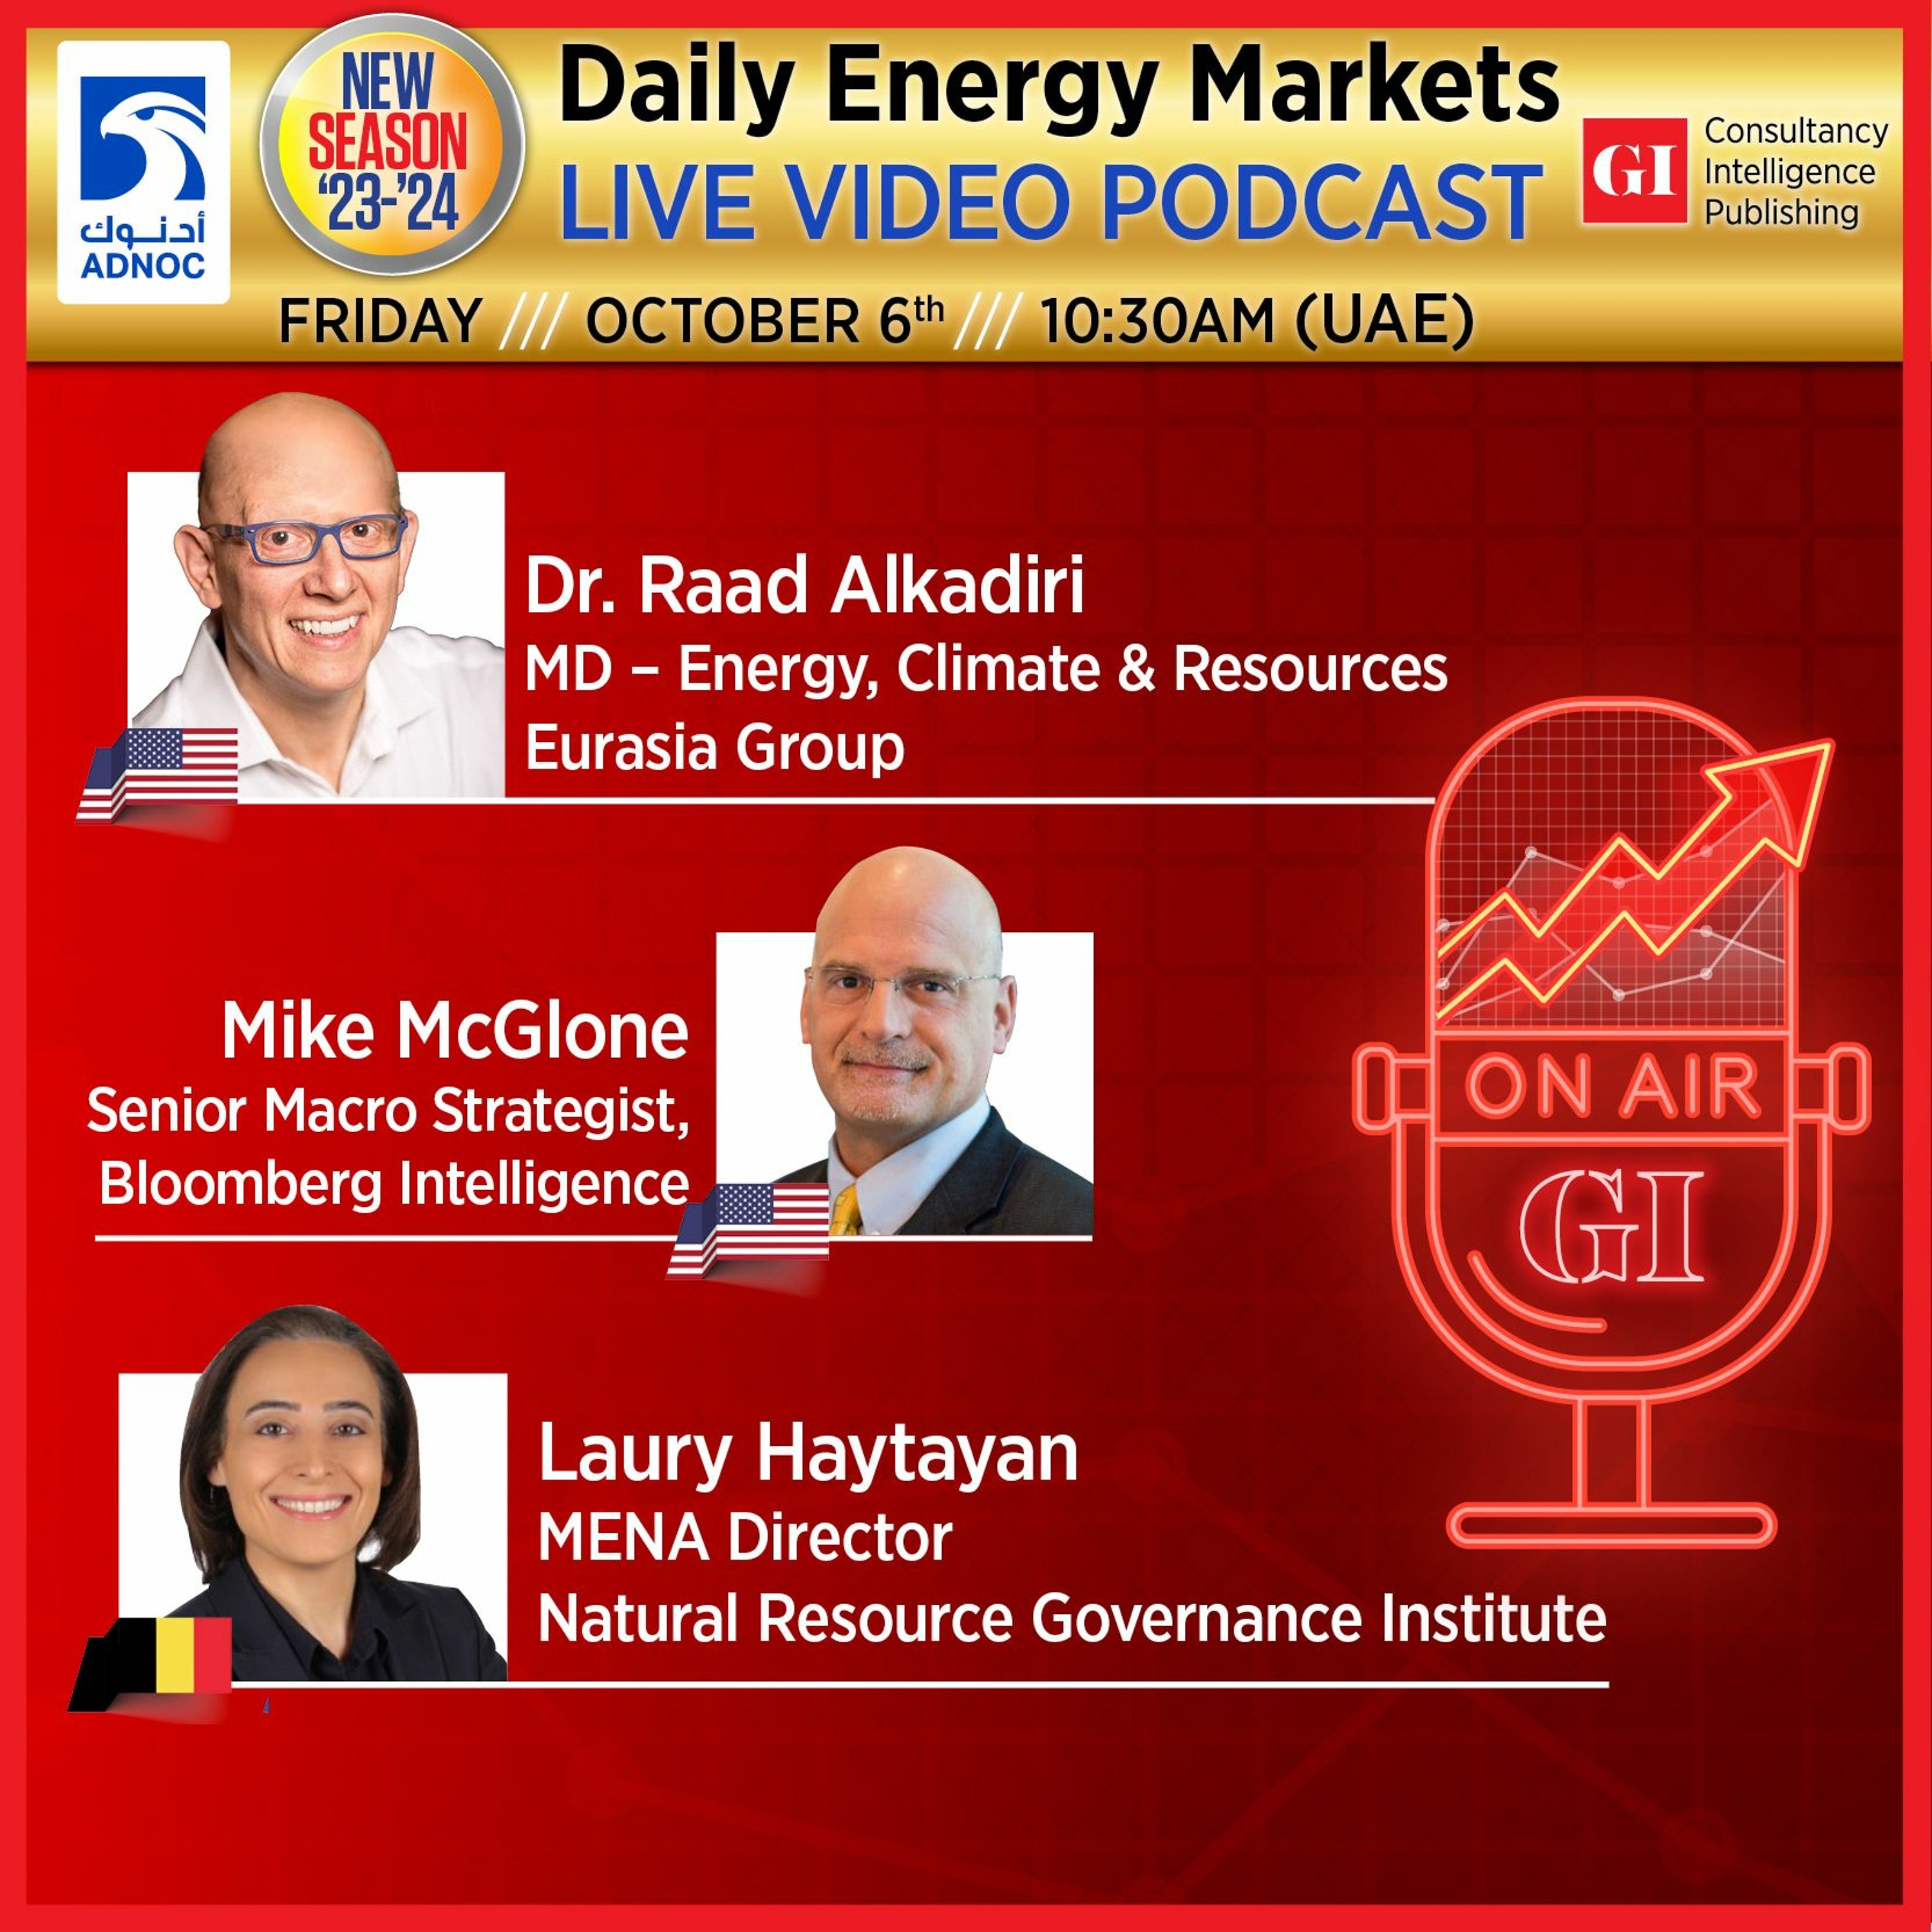 PODCAST: Daily Energy Markets - October 6th